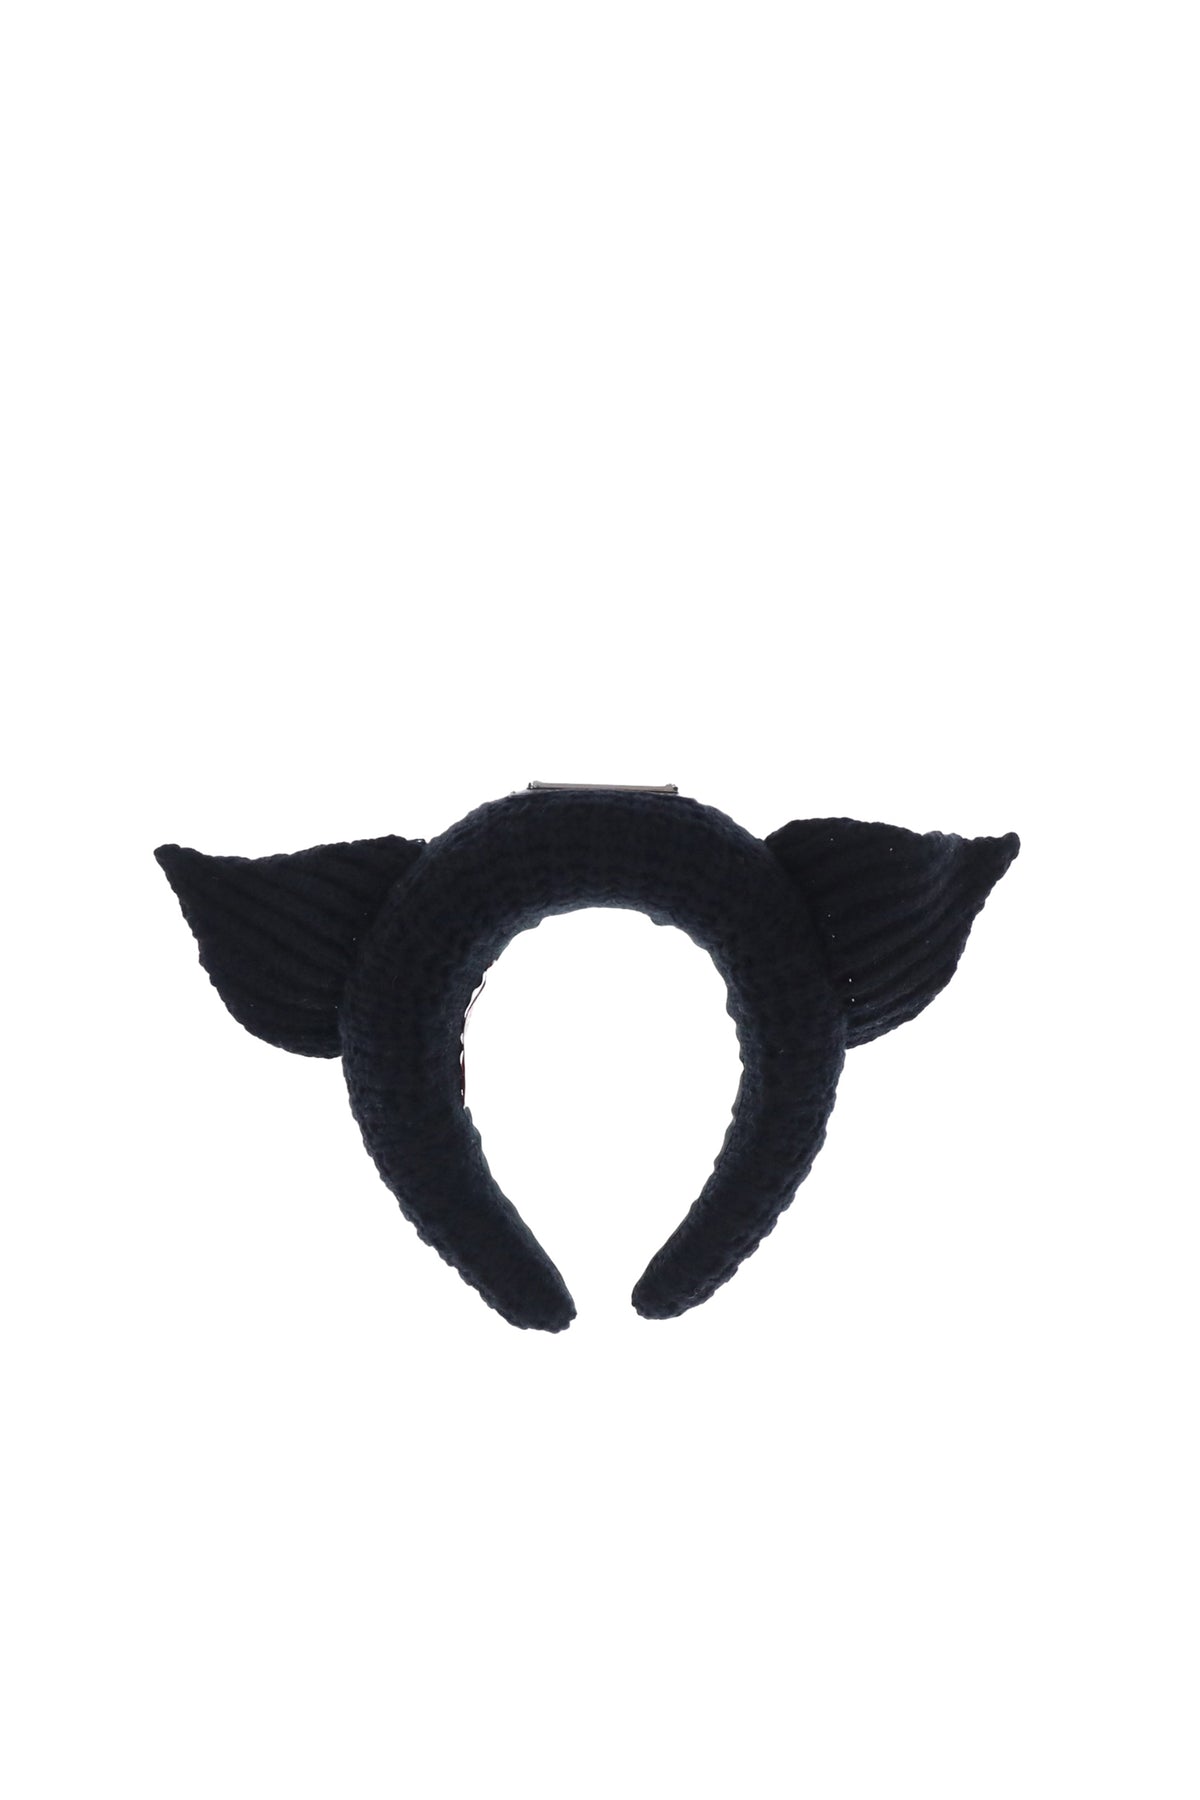 EARS ALICE BAND / BLK